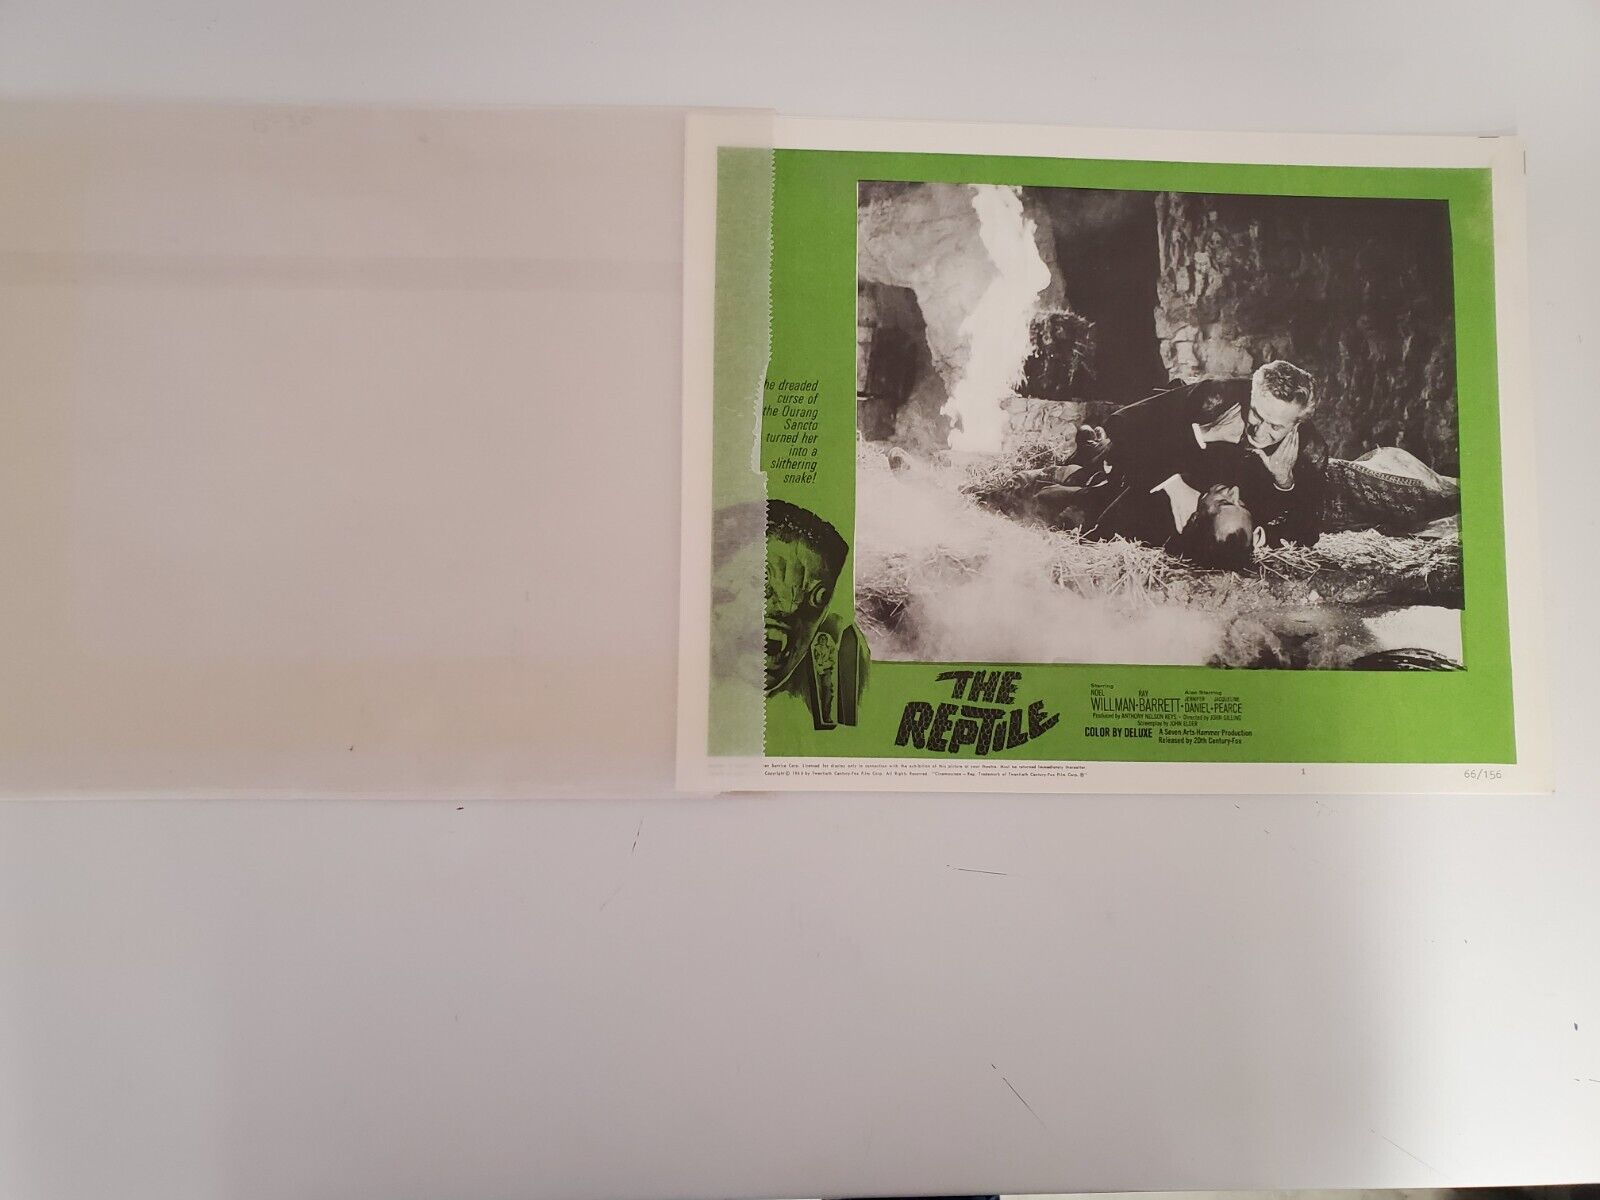  Theater lobby cards set 1966 New Horror The Reptile